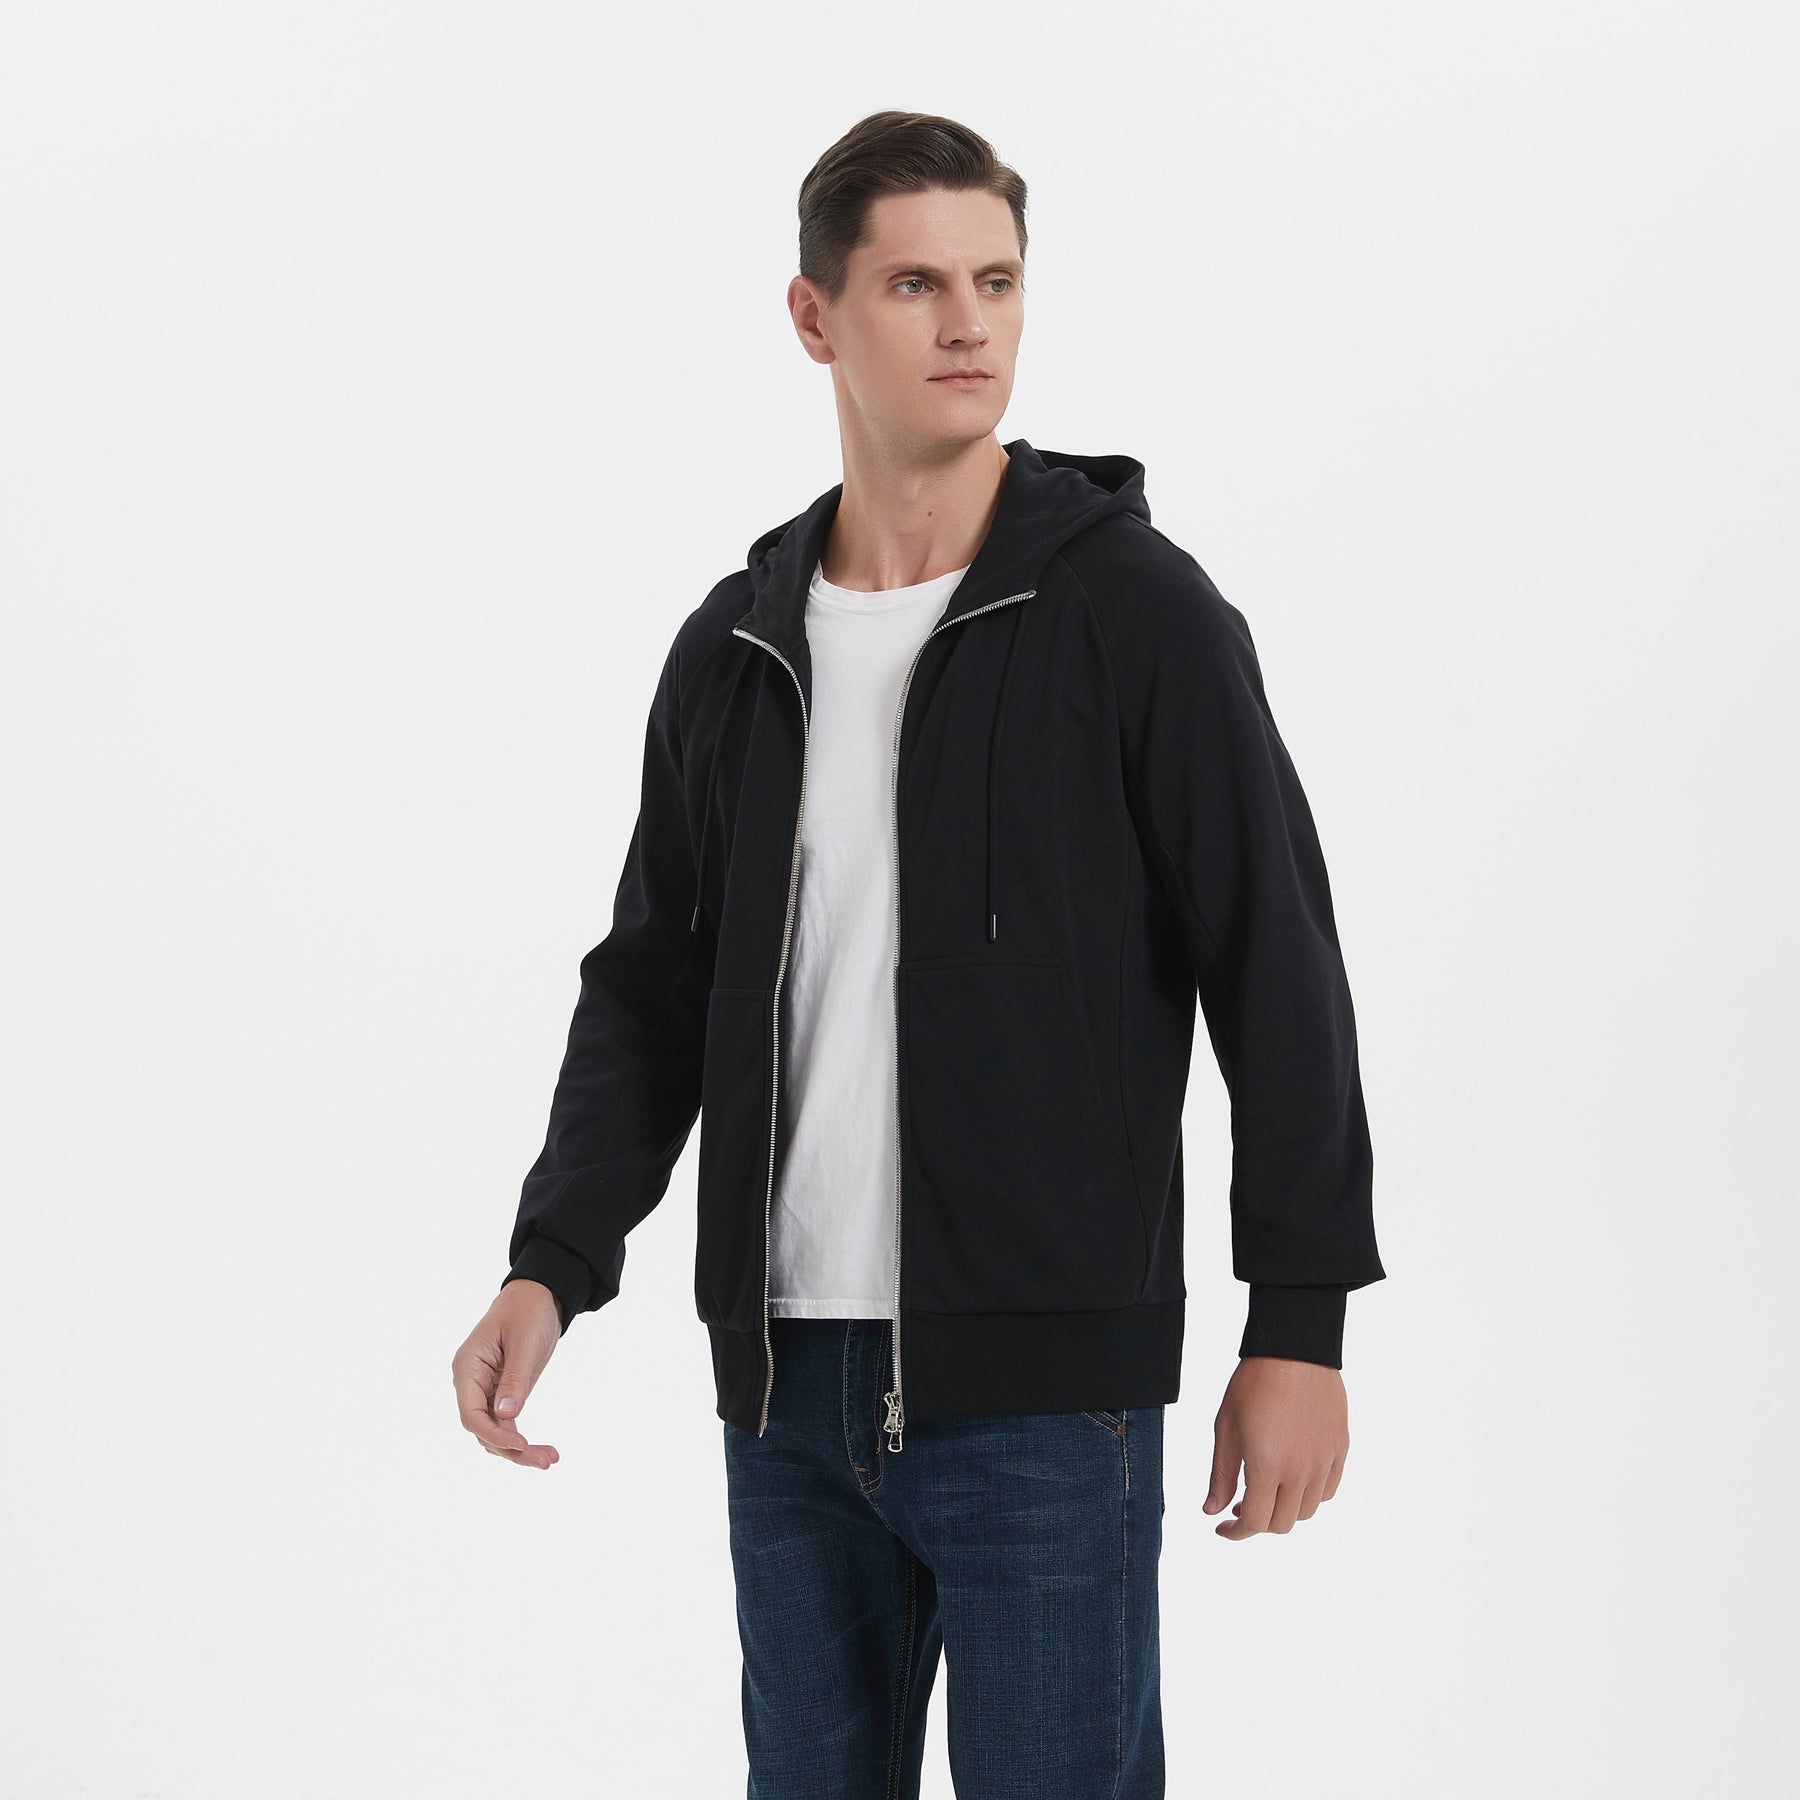 EMF Shielding Hoodie in XL size fitted by a tall male model. It is perfectly fit.